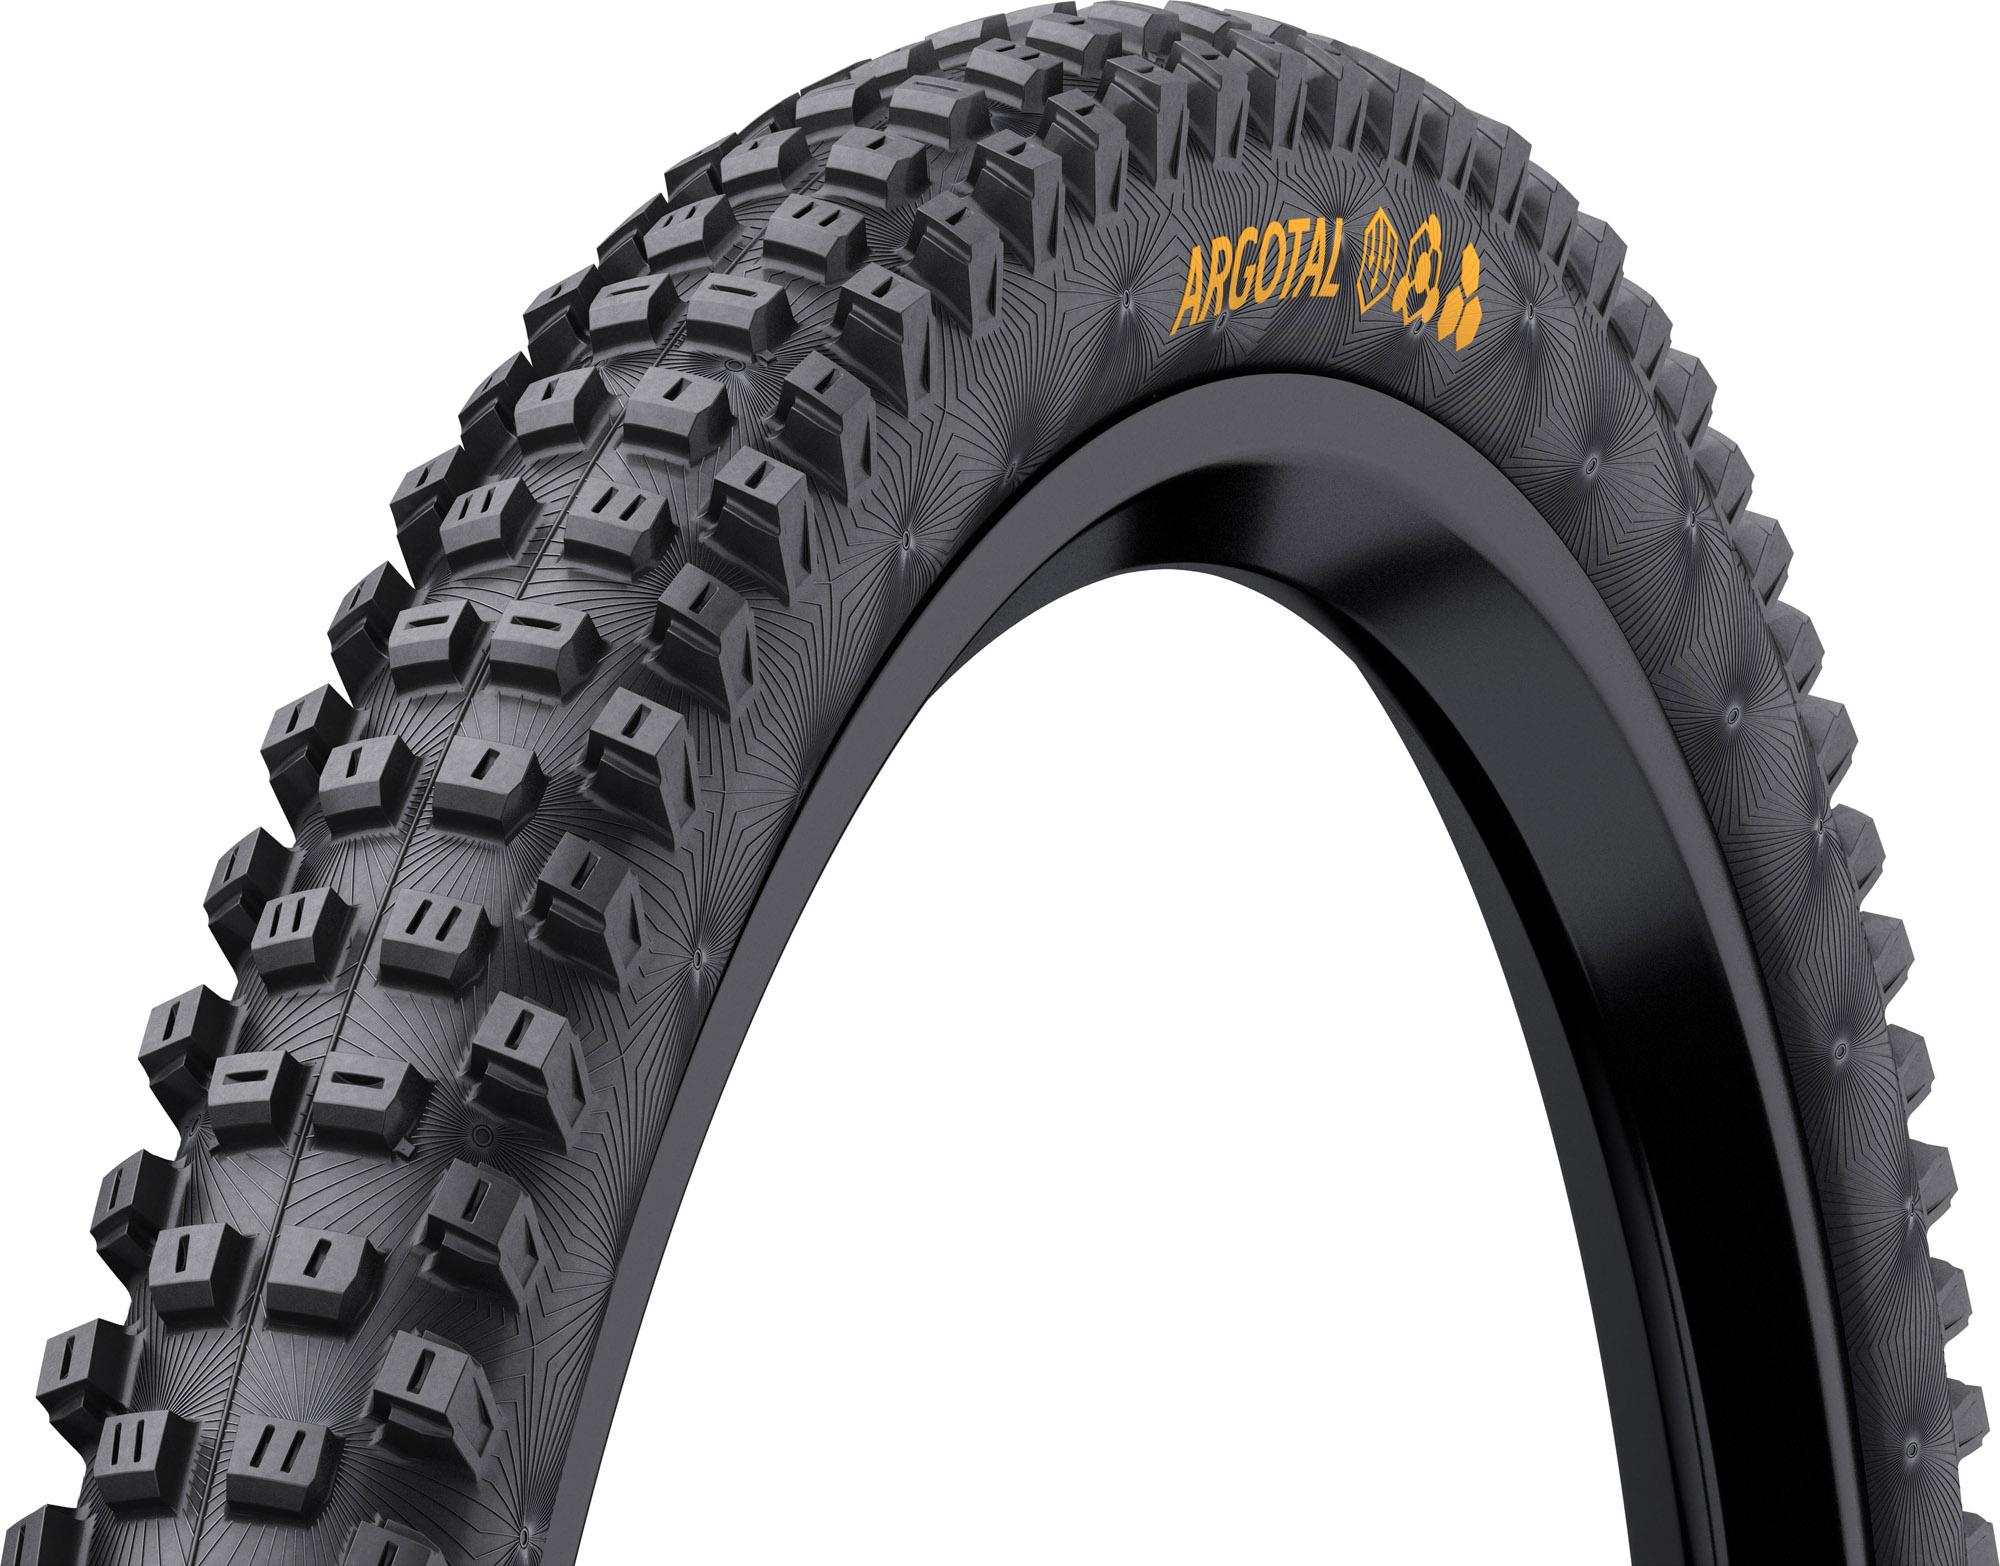 Continental Argotal Dh Supersoft Mtb Tyre - Black